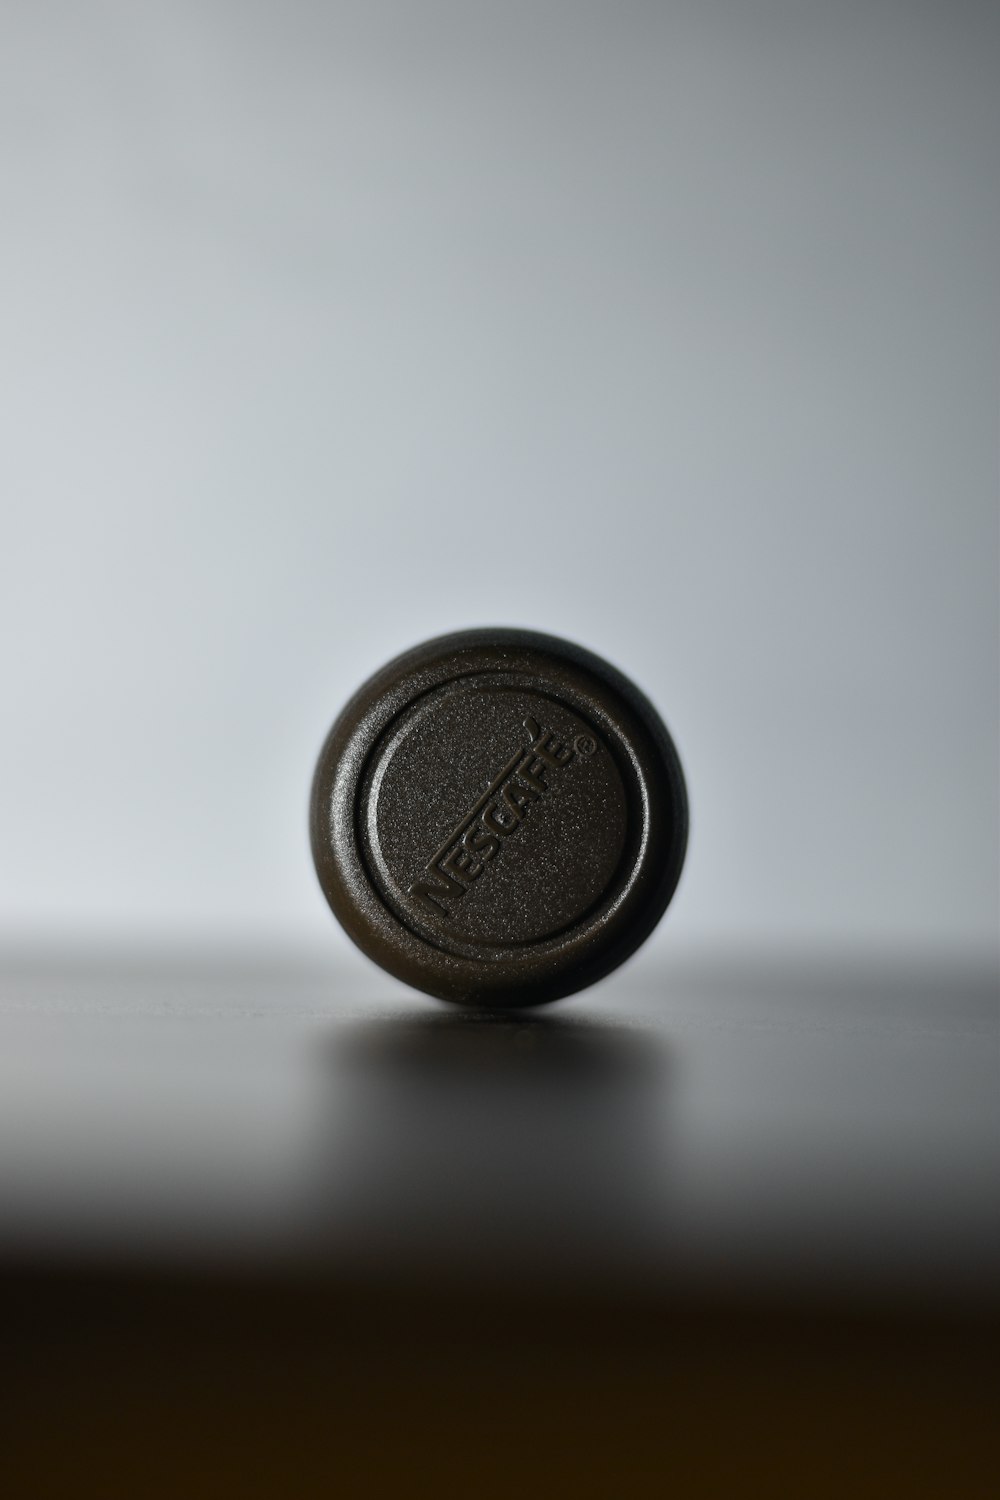 a close up of a bottle cap on a table